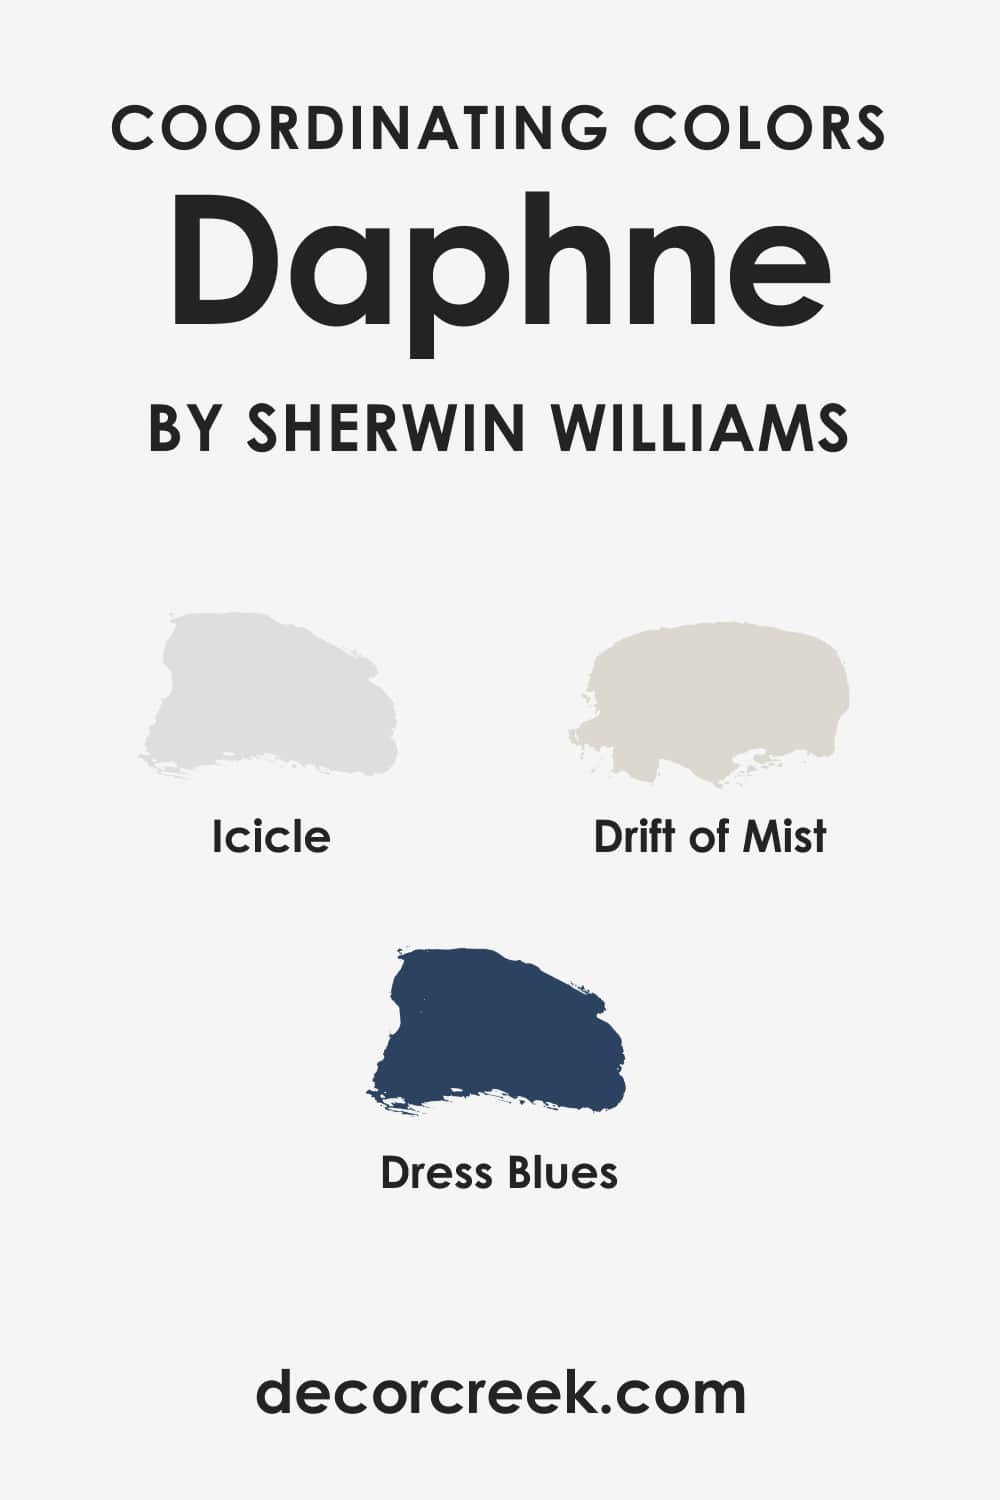 Coordinating Colors of Daphne SW-9151